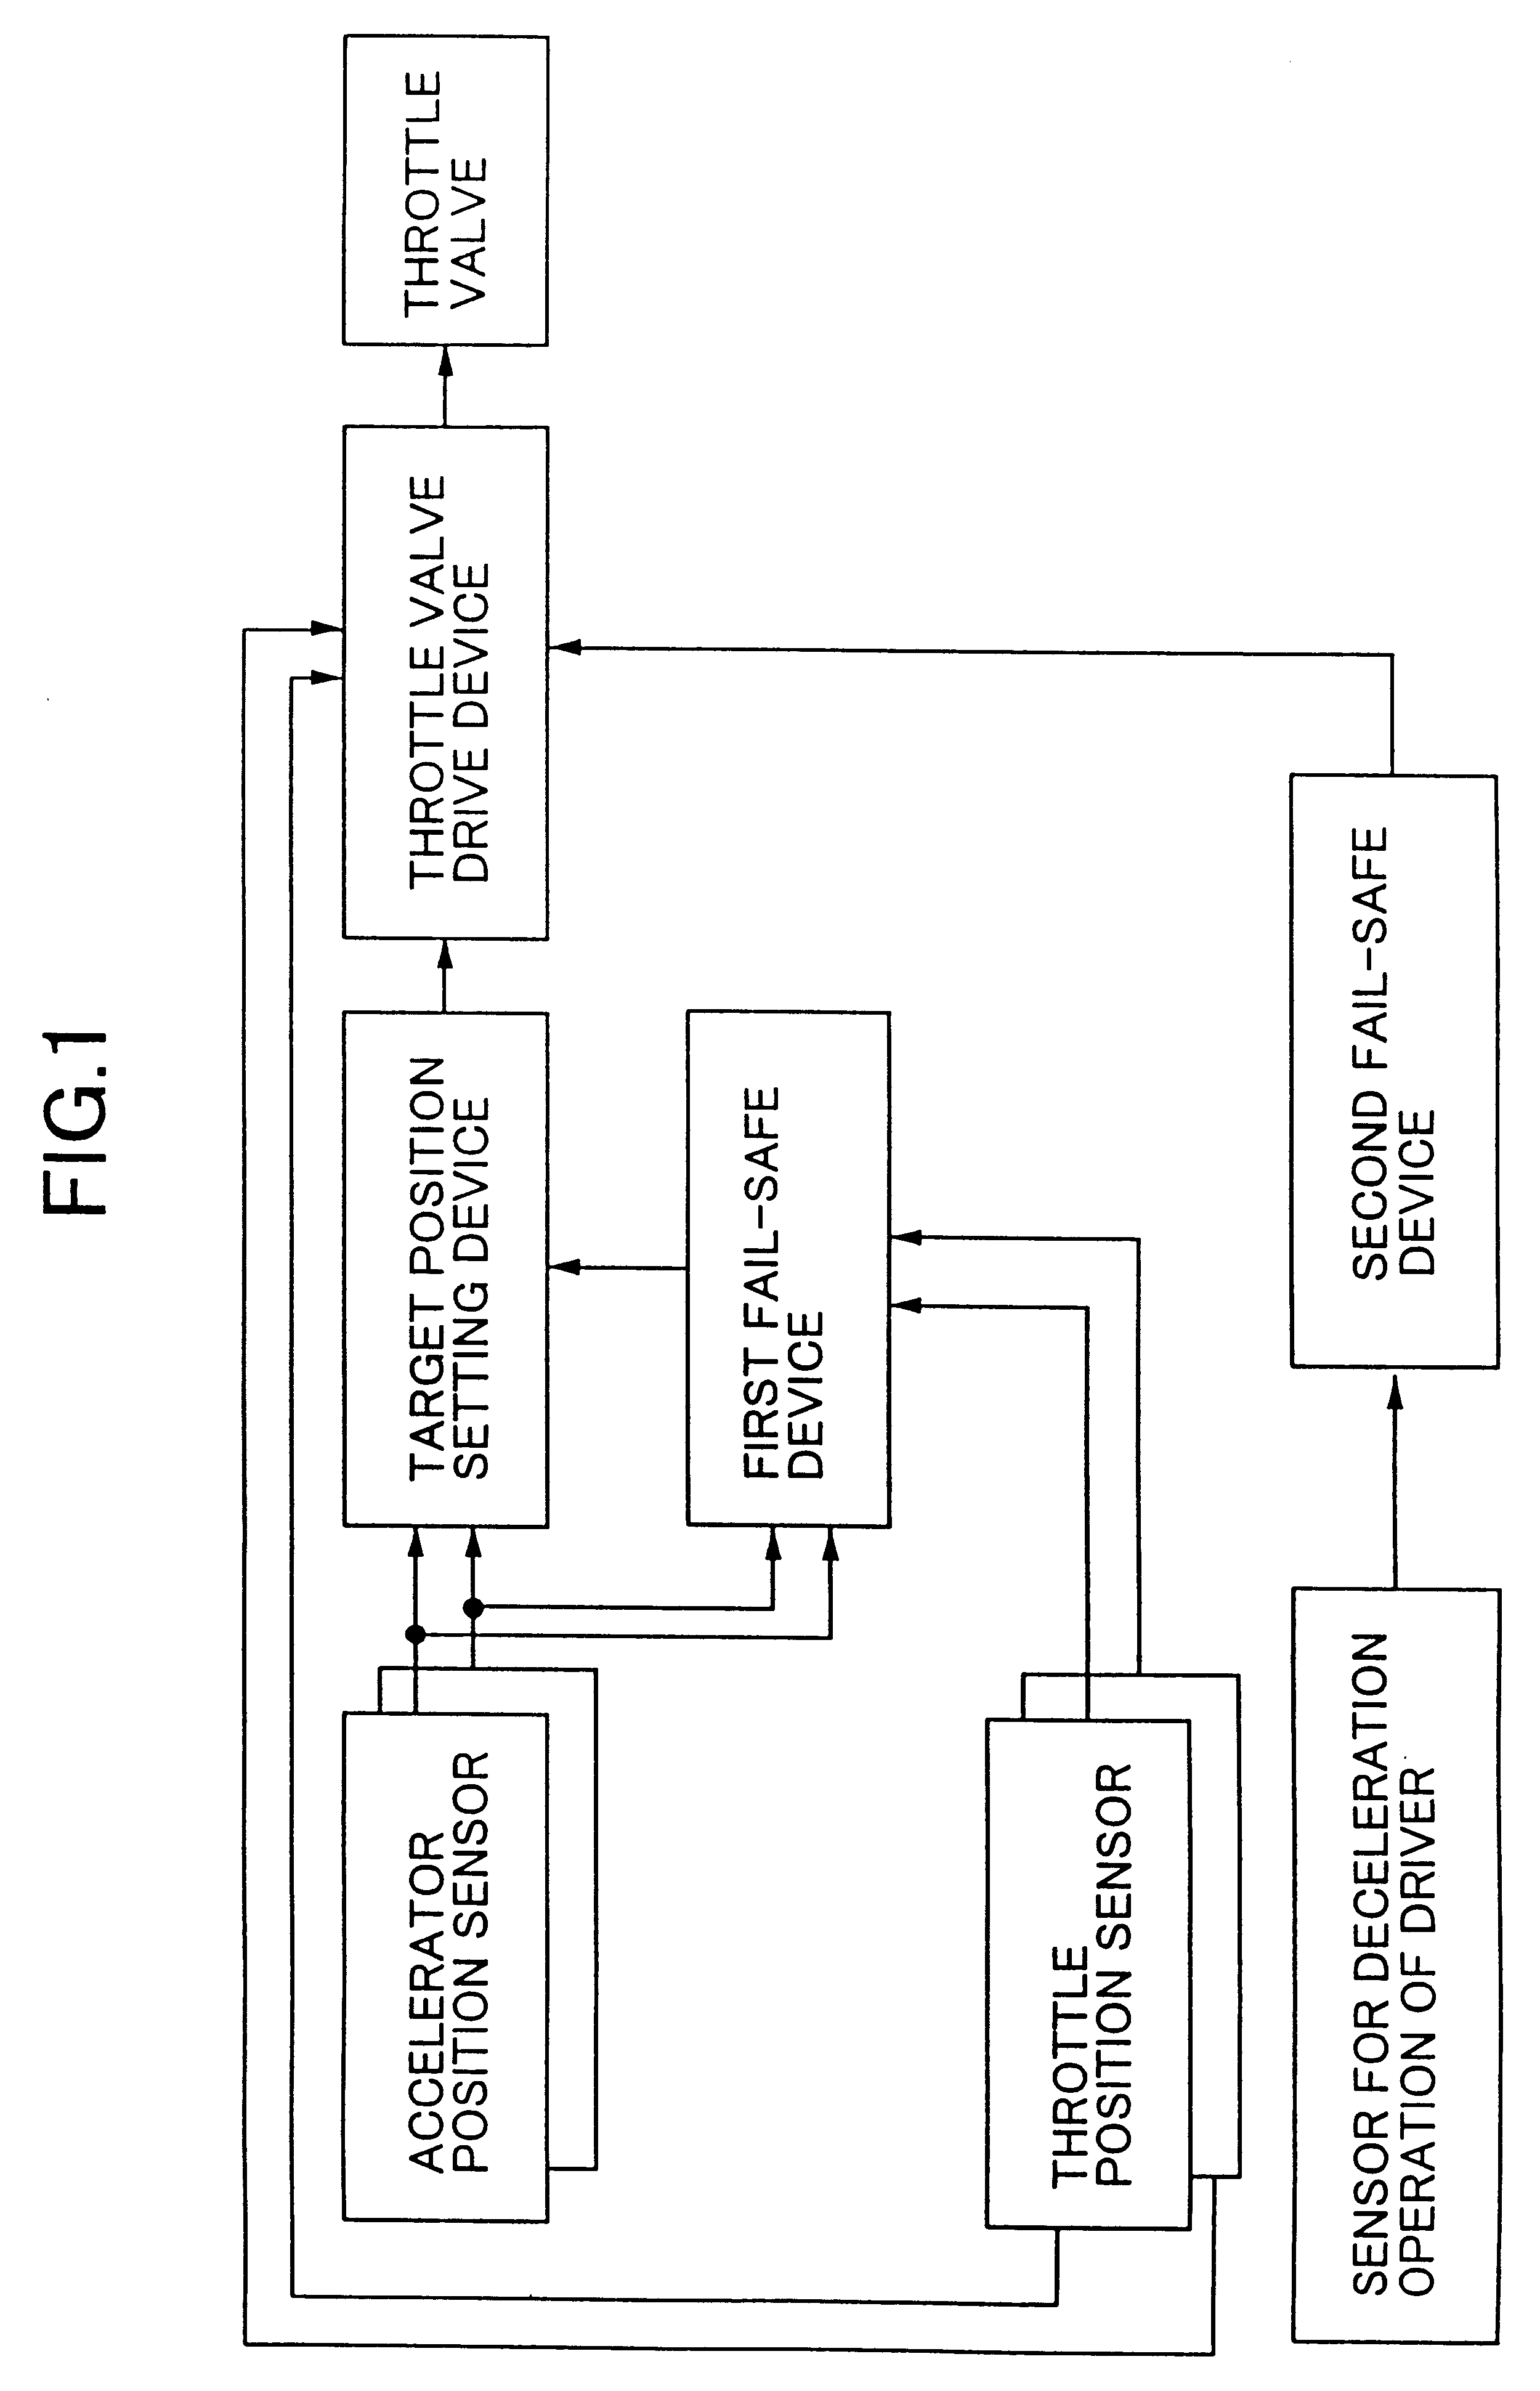 Method and apparatus for fail safe control of an electronically controlled throttle valve of an internal combustion engine